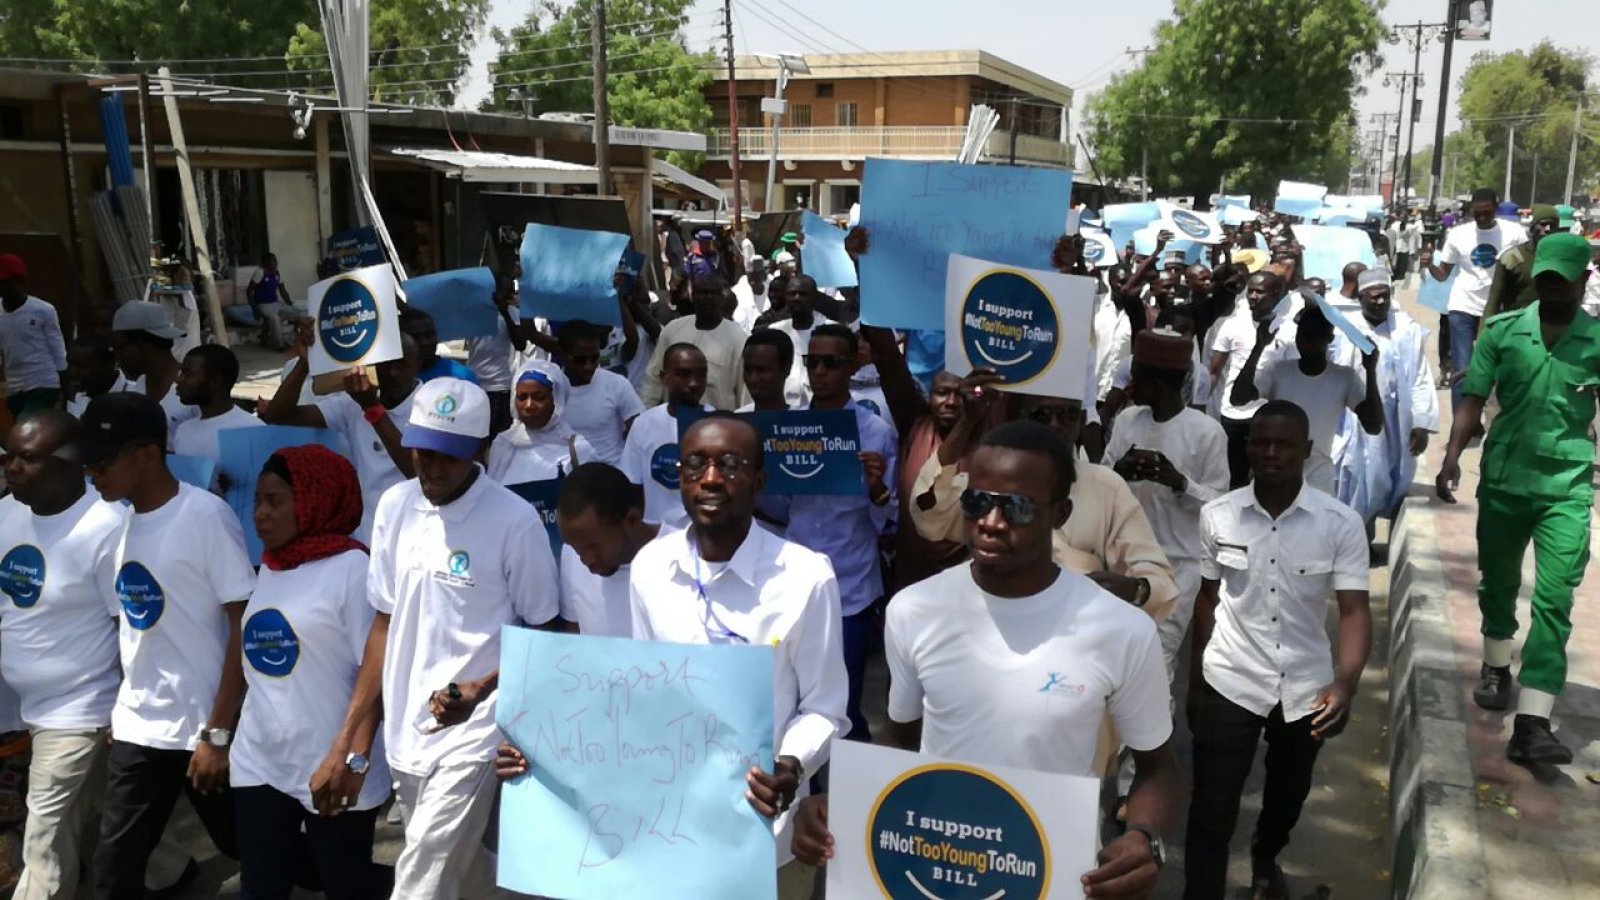 "We are Not Too Young To Run": Youth in Nigeria March to Support Bill